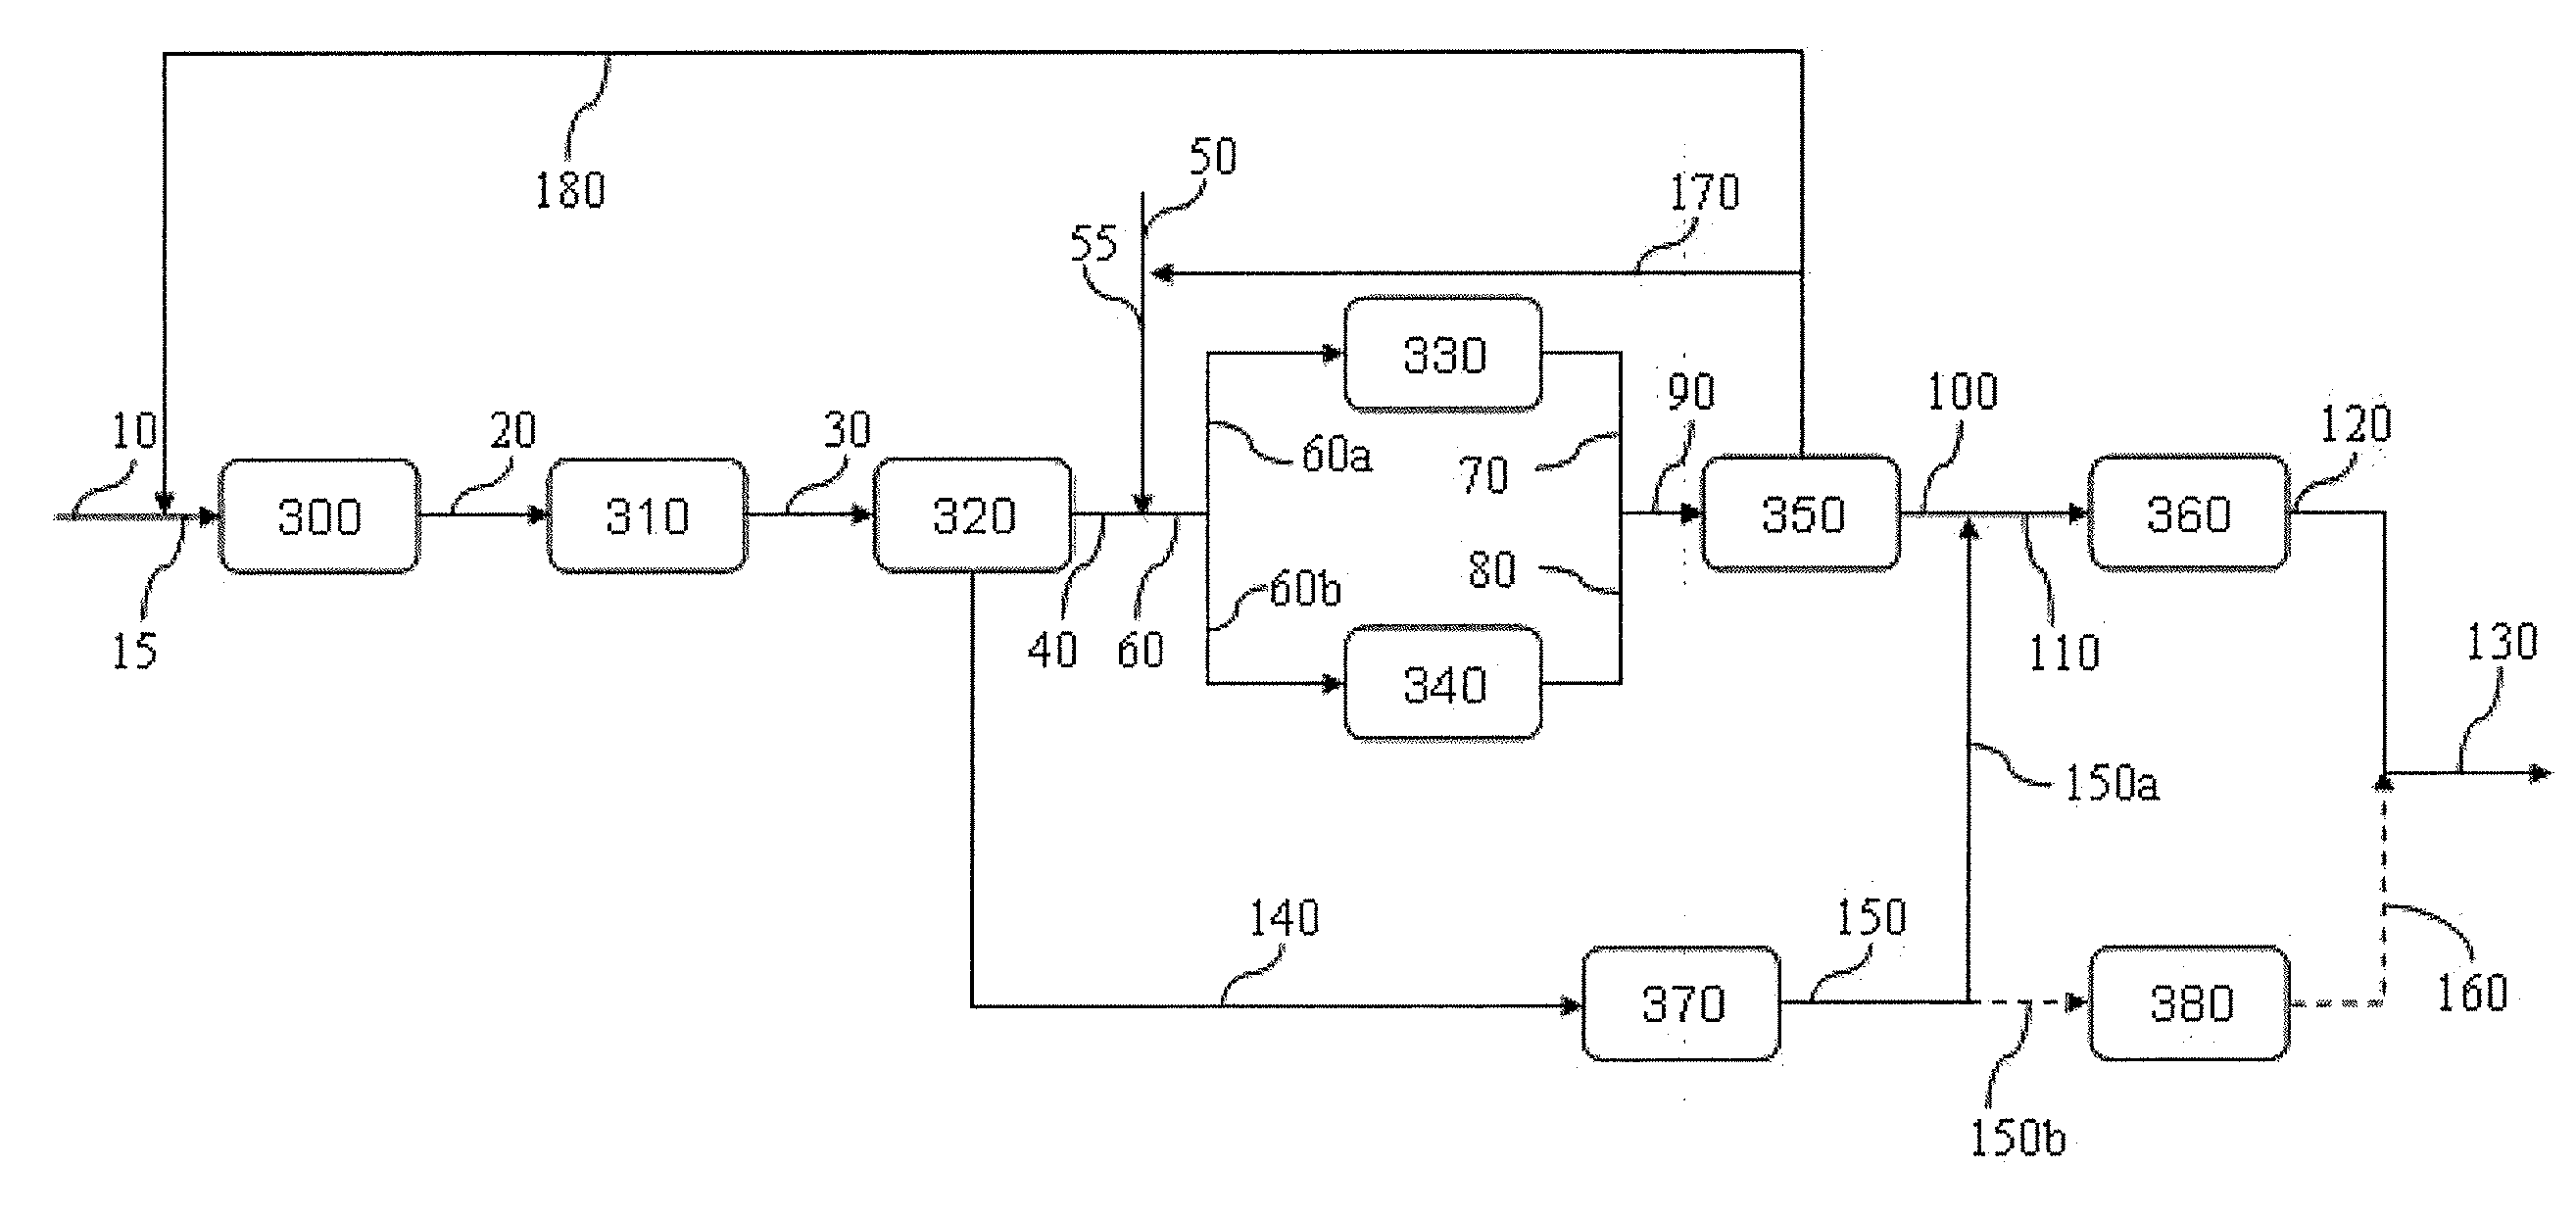 Process to obtain a highly soluble linear alkylbenzene sulfonate